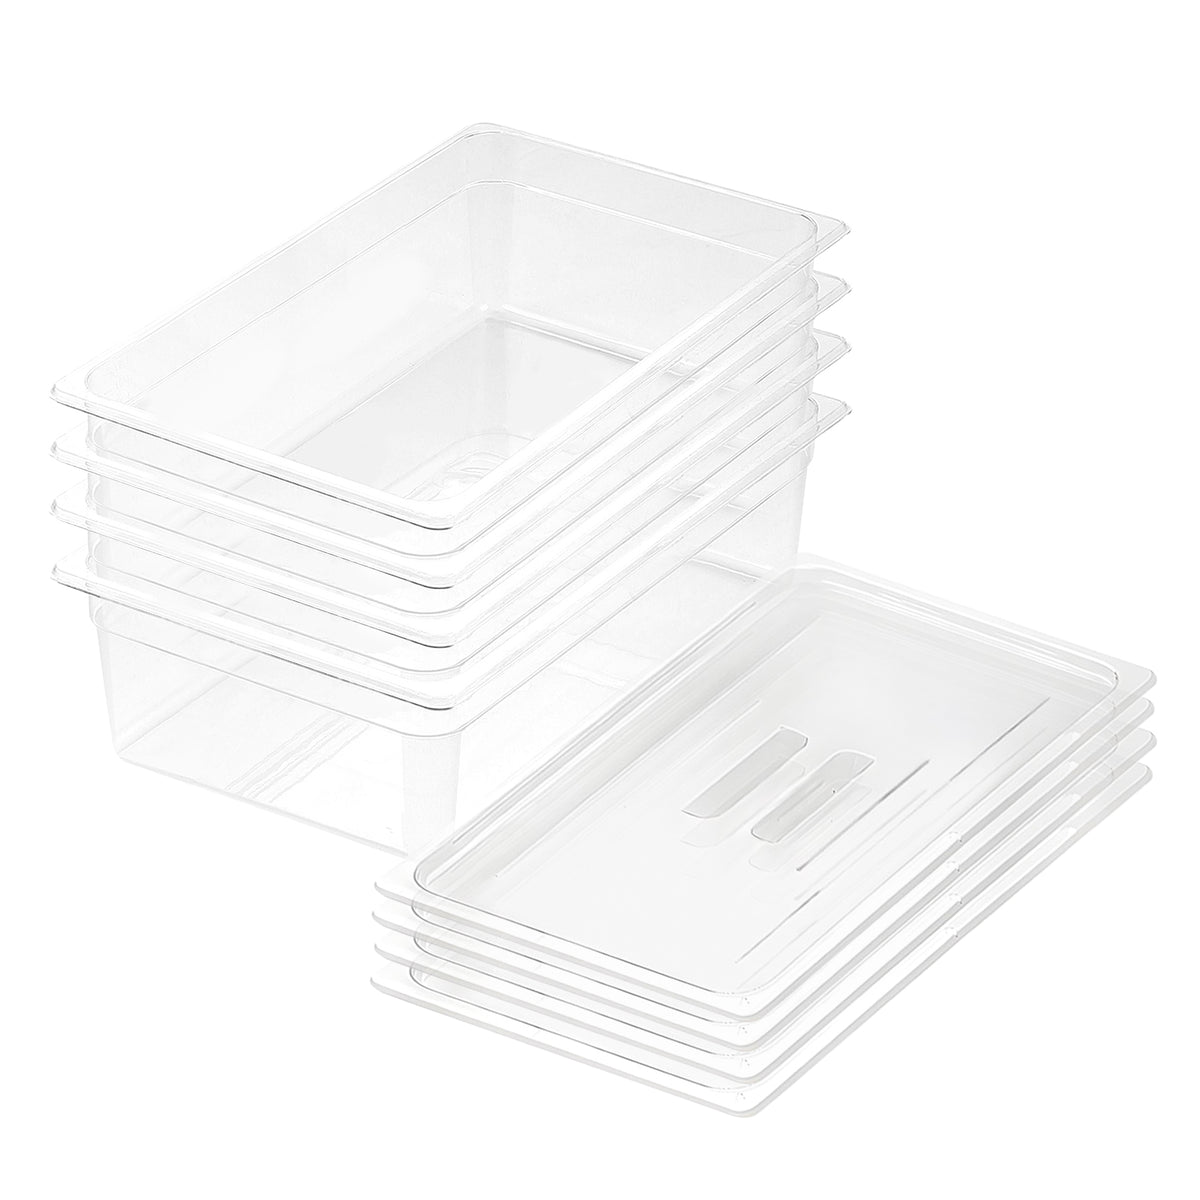 SOGA 150mm Clear Gastronorm GN Pan 1/1 Food Tray Storage Bundle of 4 with Lid